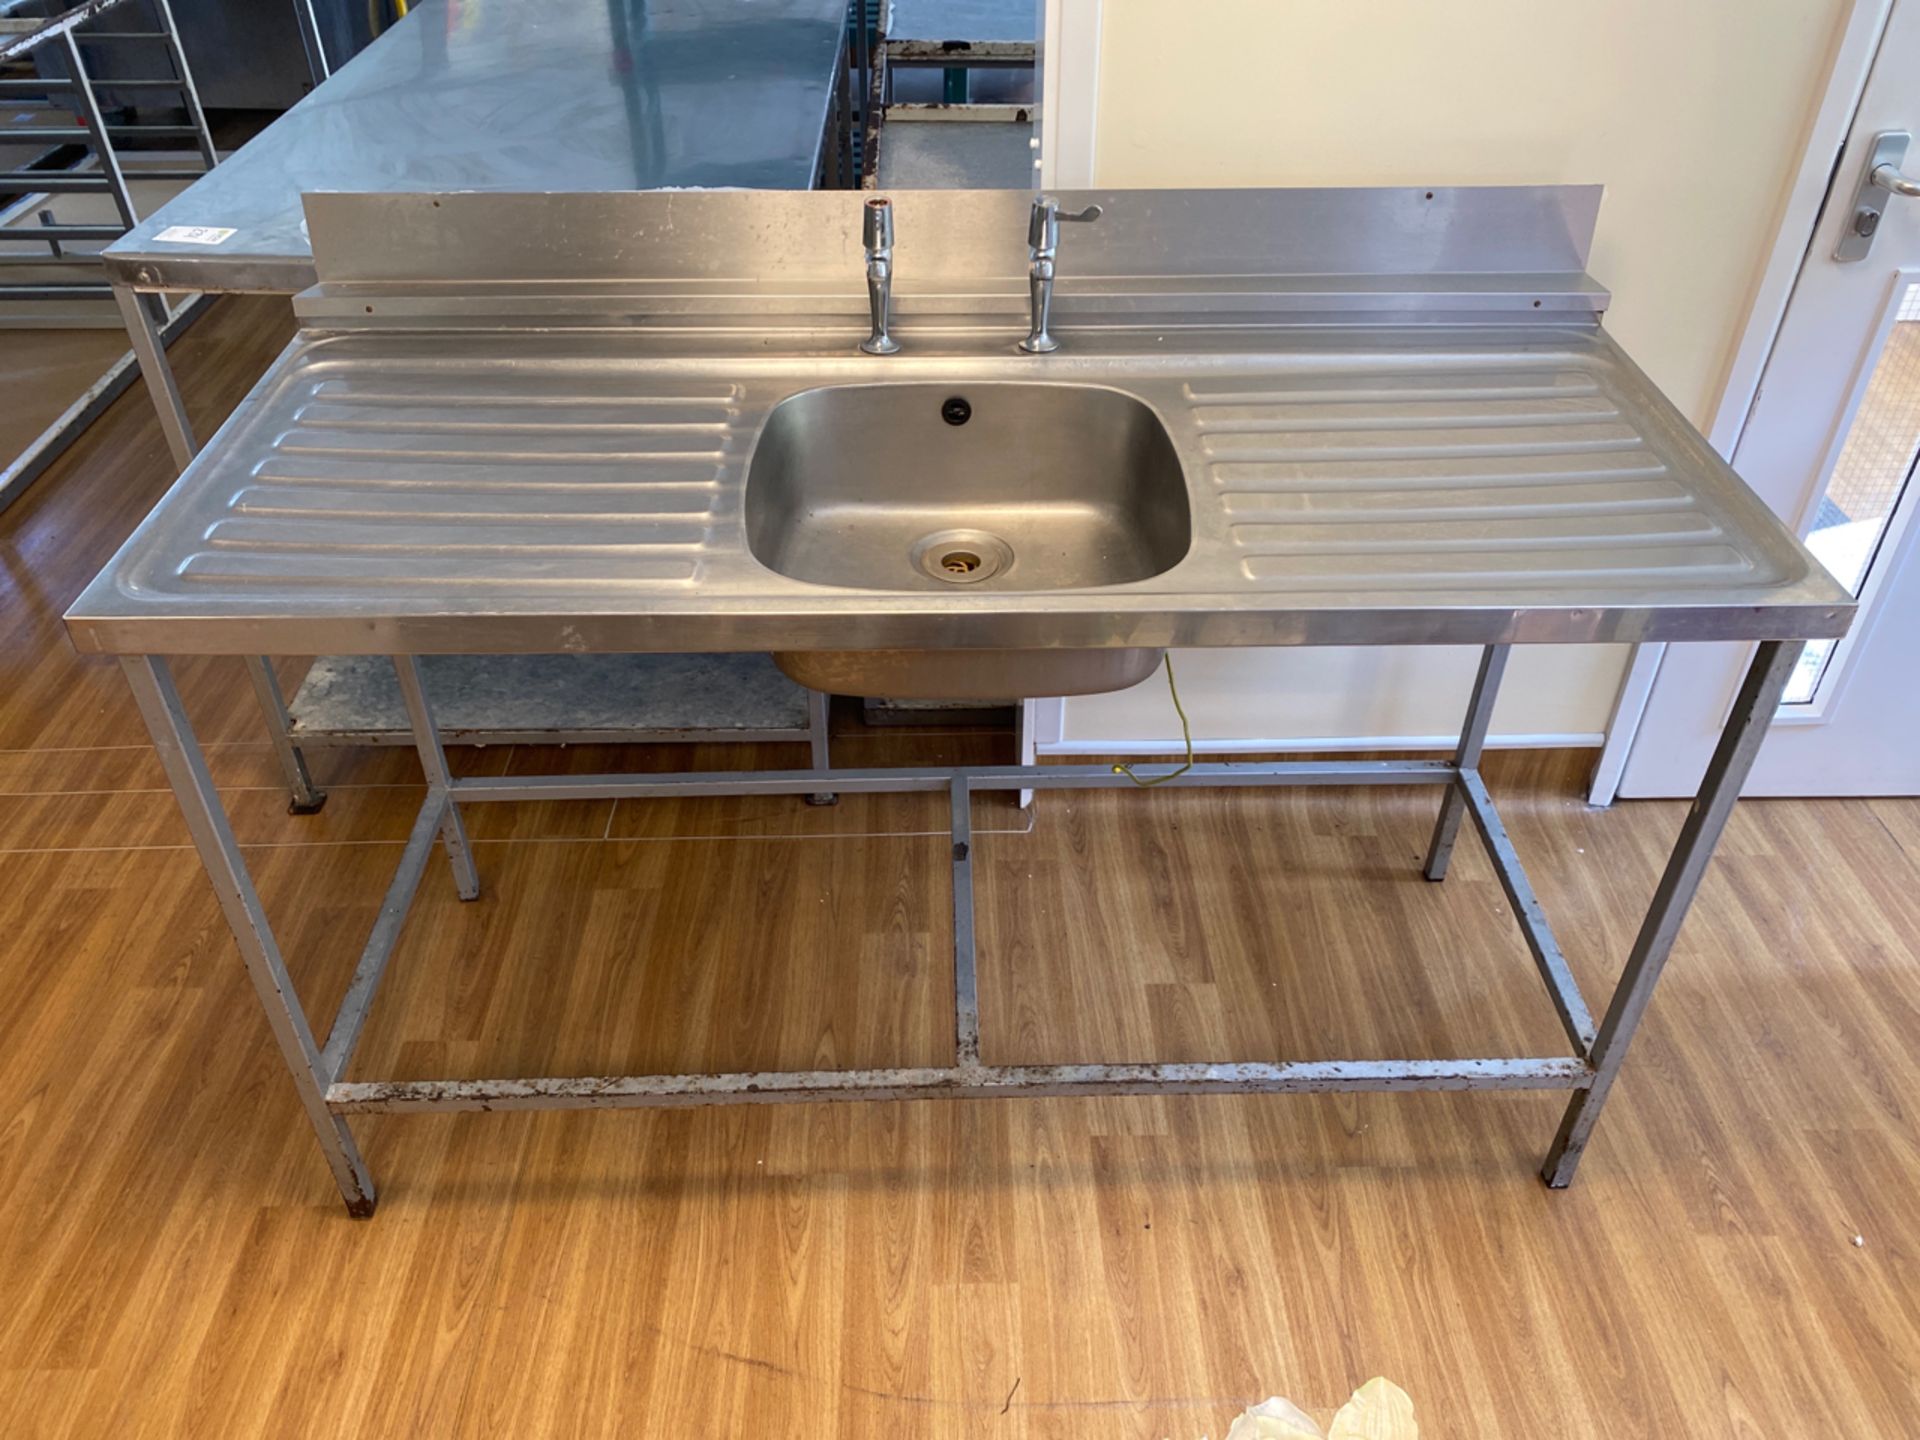 Stainless Steel Sink Unit - Image 2 of 10